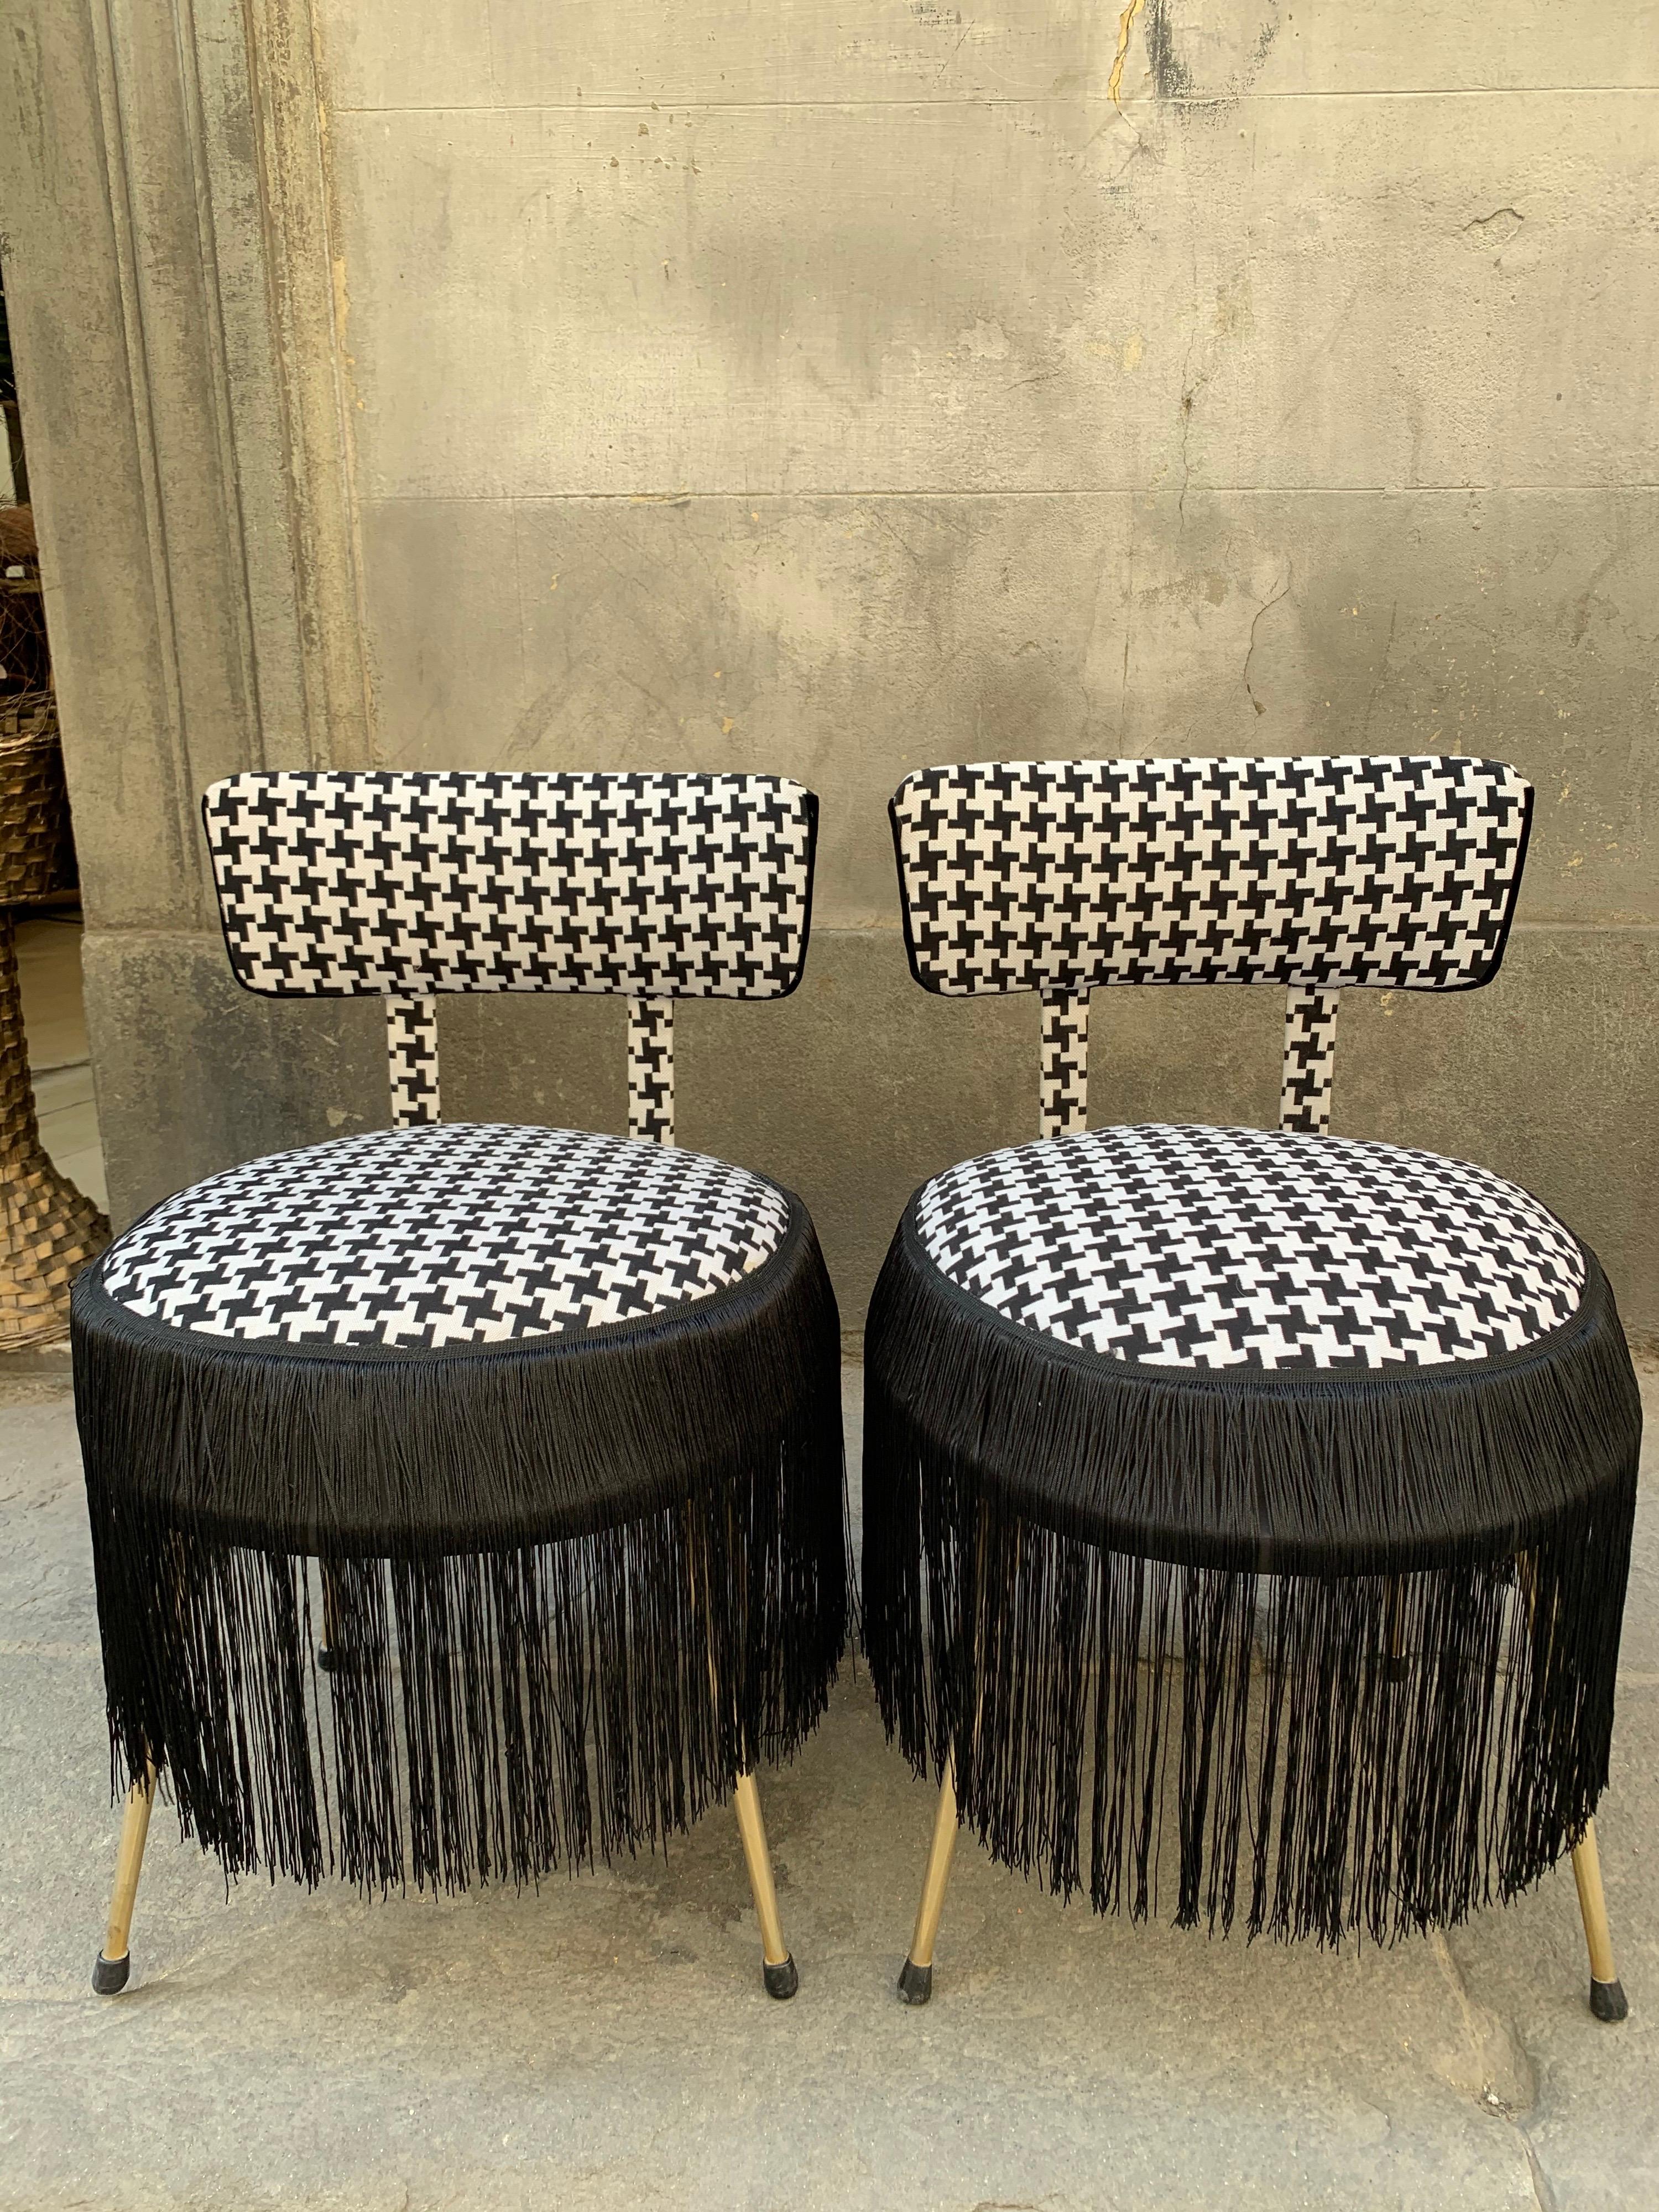 Pair of midcentury small padded chairs Houndstooth fabric with black fringe.
The chairs are newly upholstered with Houndstooth fabric (Pied de Poule) by Dedar.
Golden brass legs.